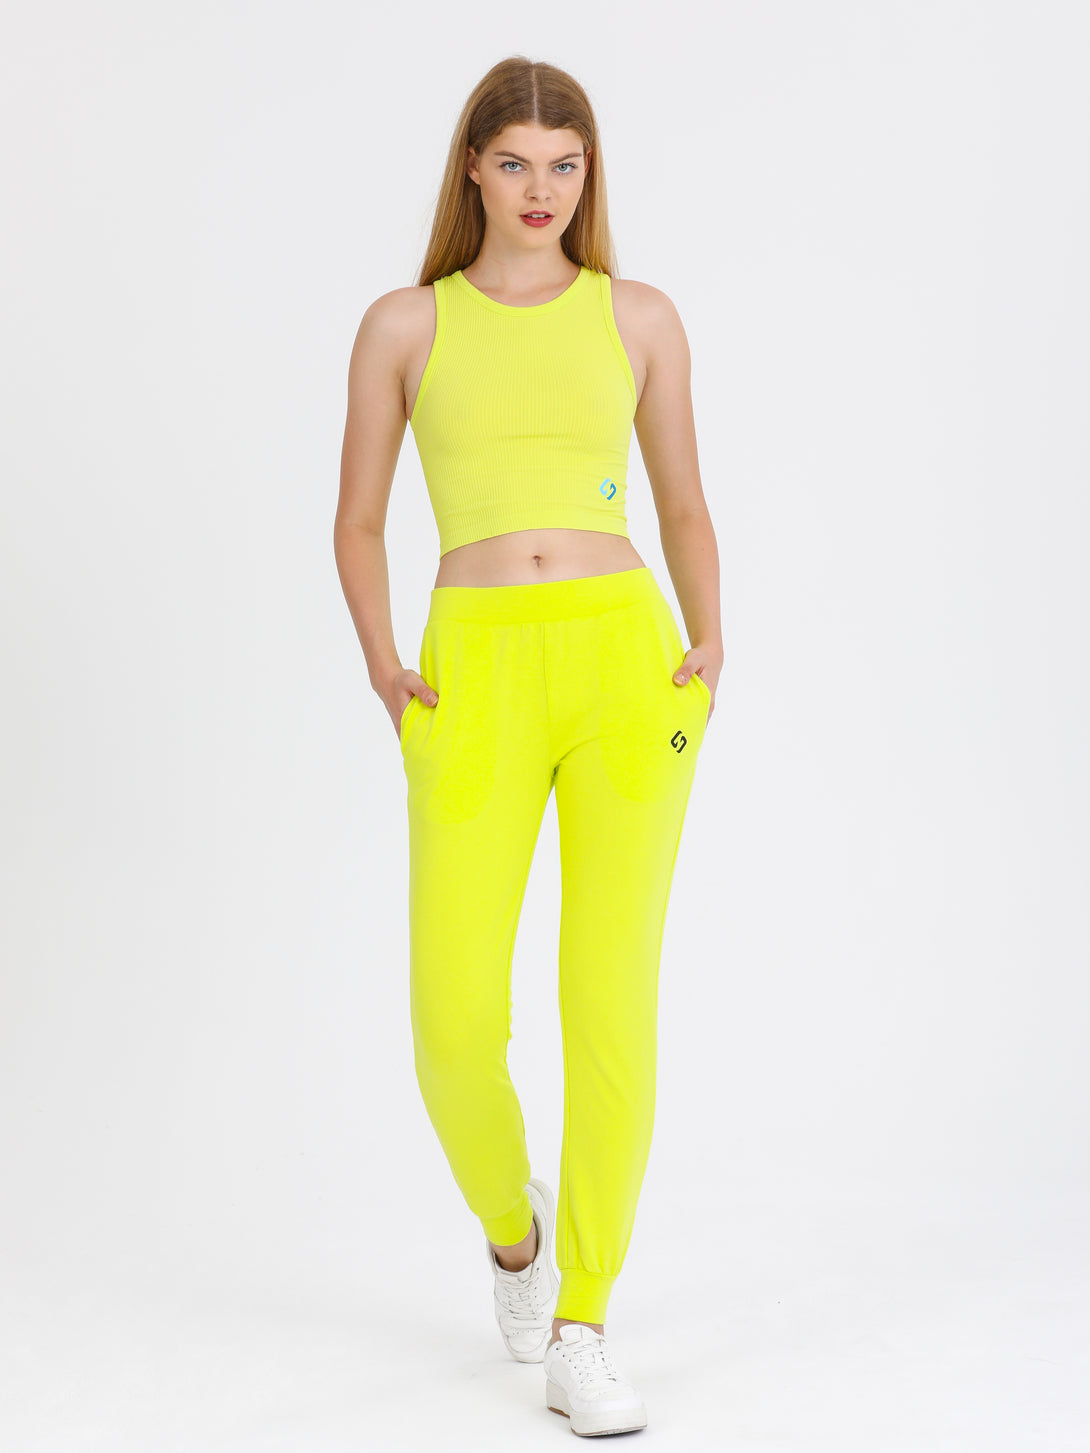 A Woman Wearing Limeade Color All-Day Sleeveless Strapped Crop Top